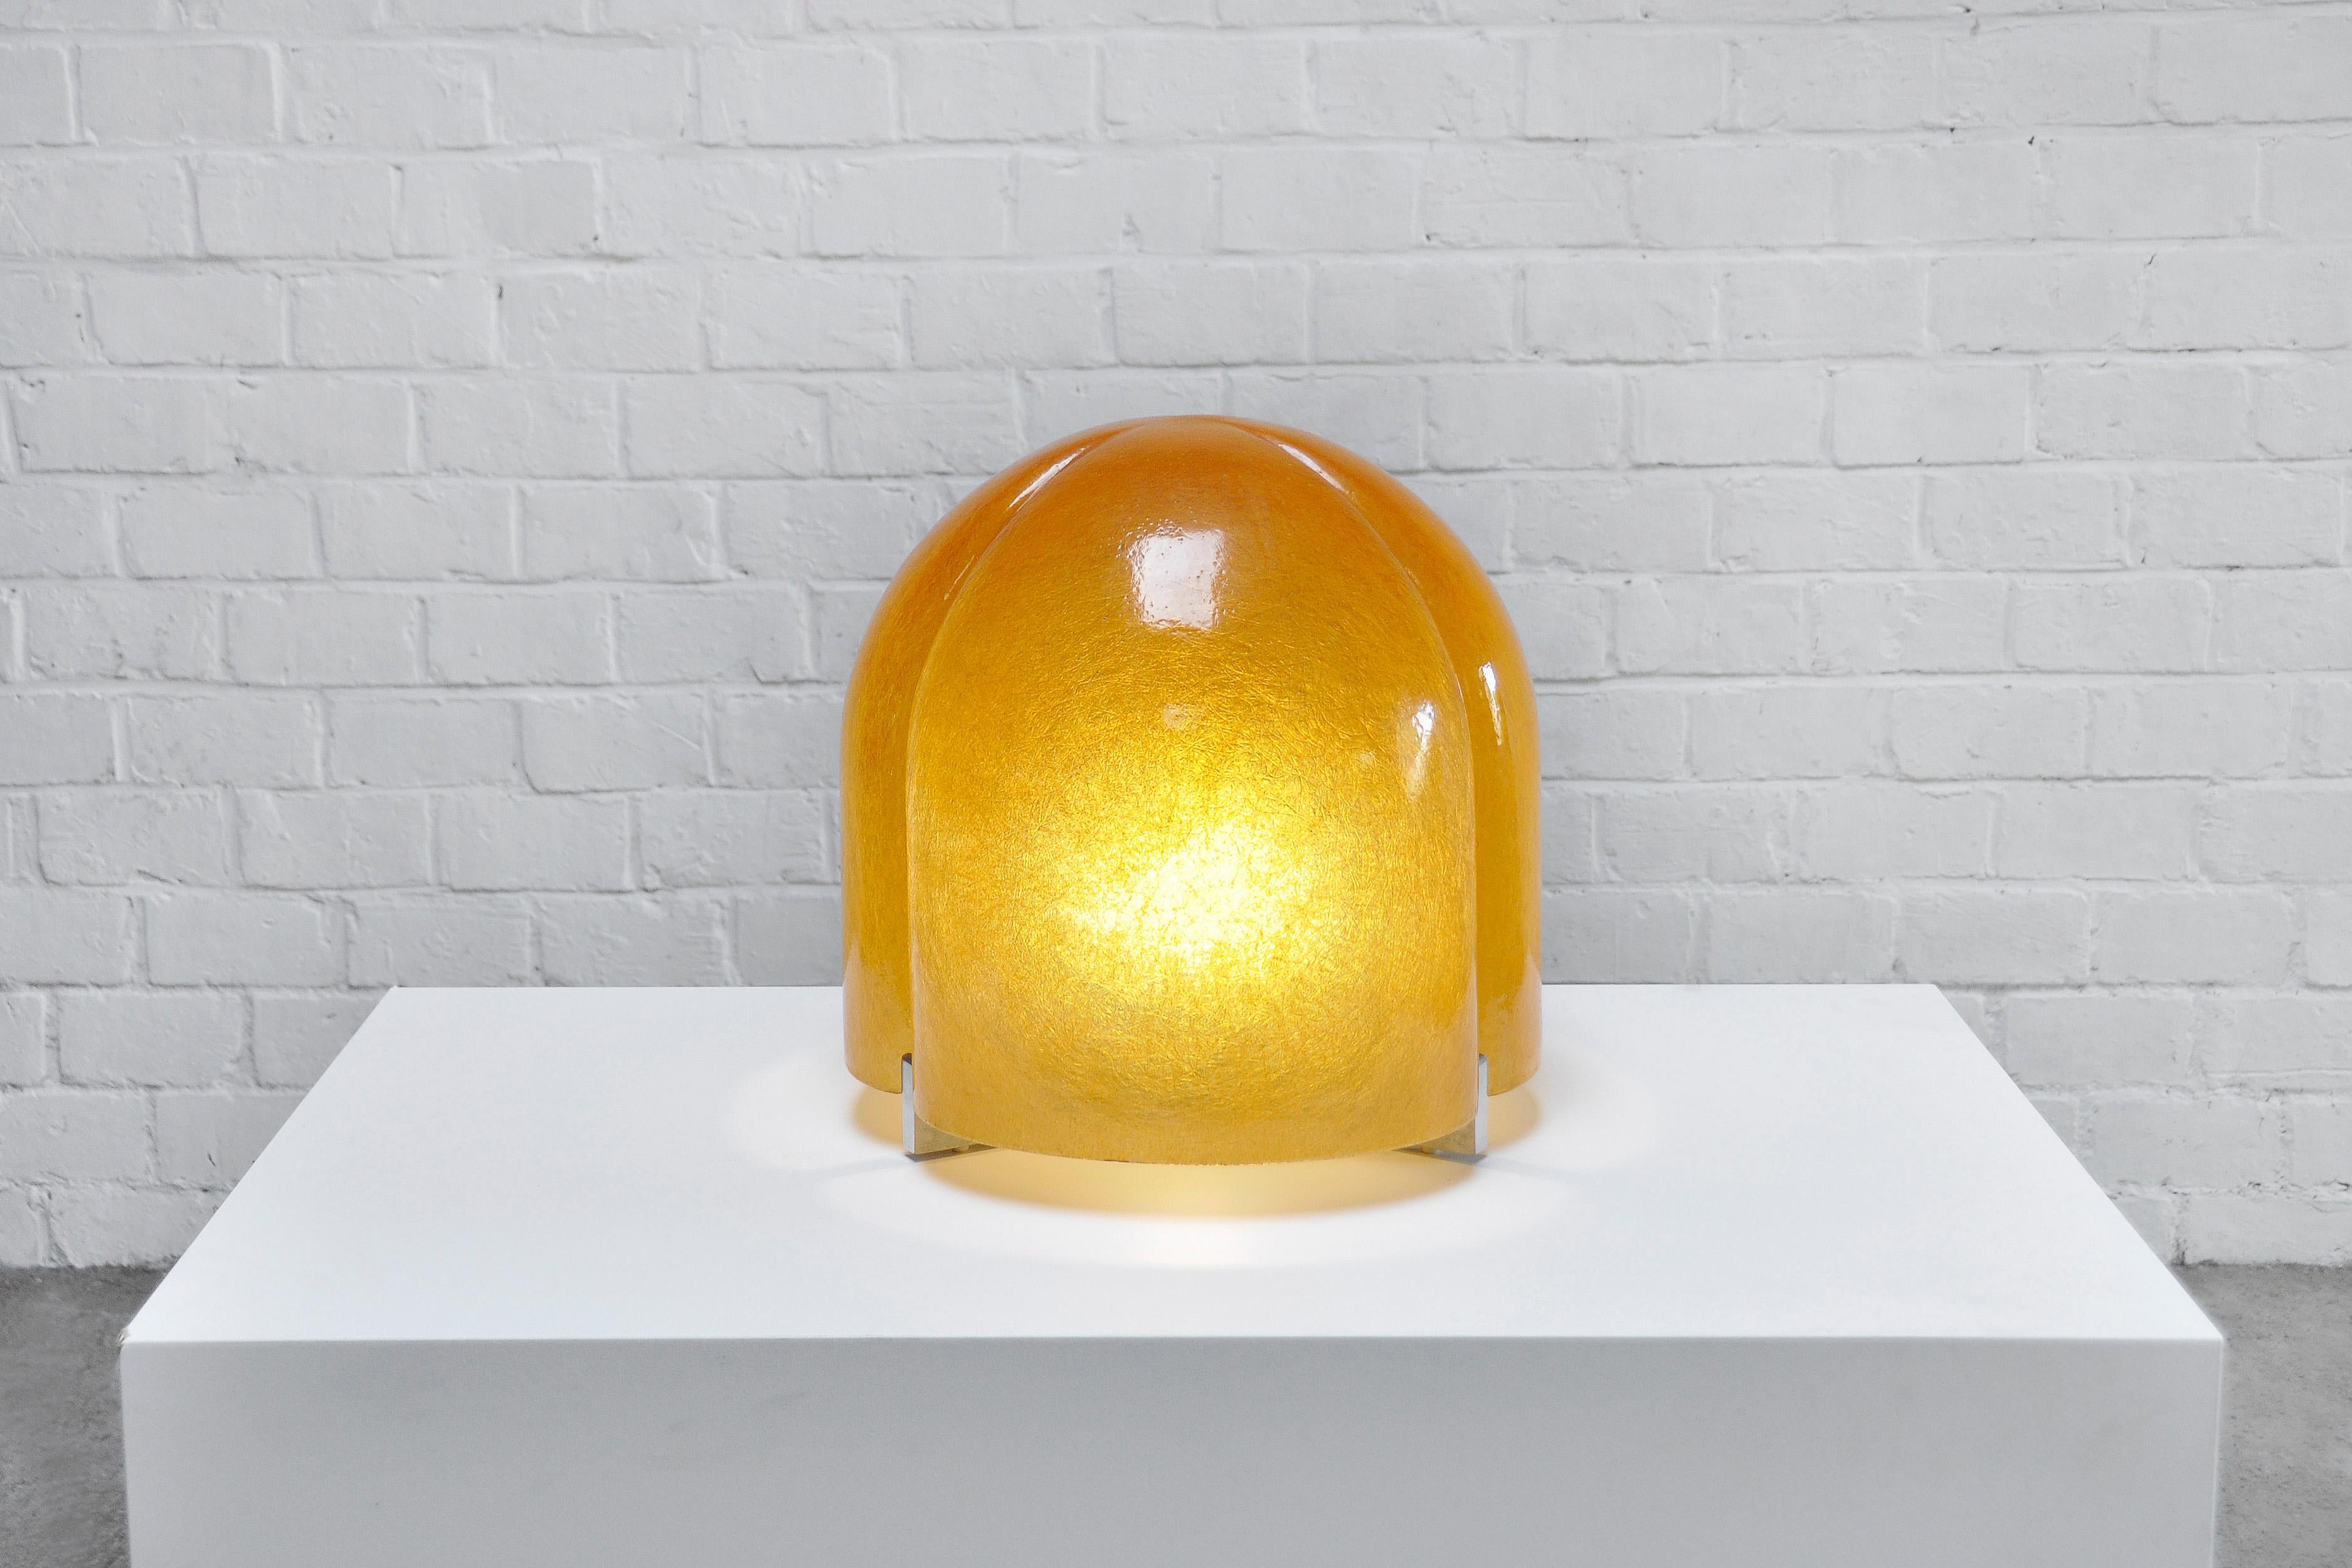 A rarely seen 'Tricia' object lamp by Salvatore Gregorietti for Valenti, Italy 1960’s. The lamp features a resin shade on a metal construction base. The resin shell emits a diffuse and soft light emission, making this a beautiful centerpiece. Can be